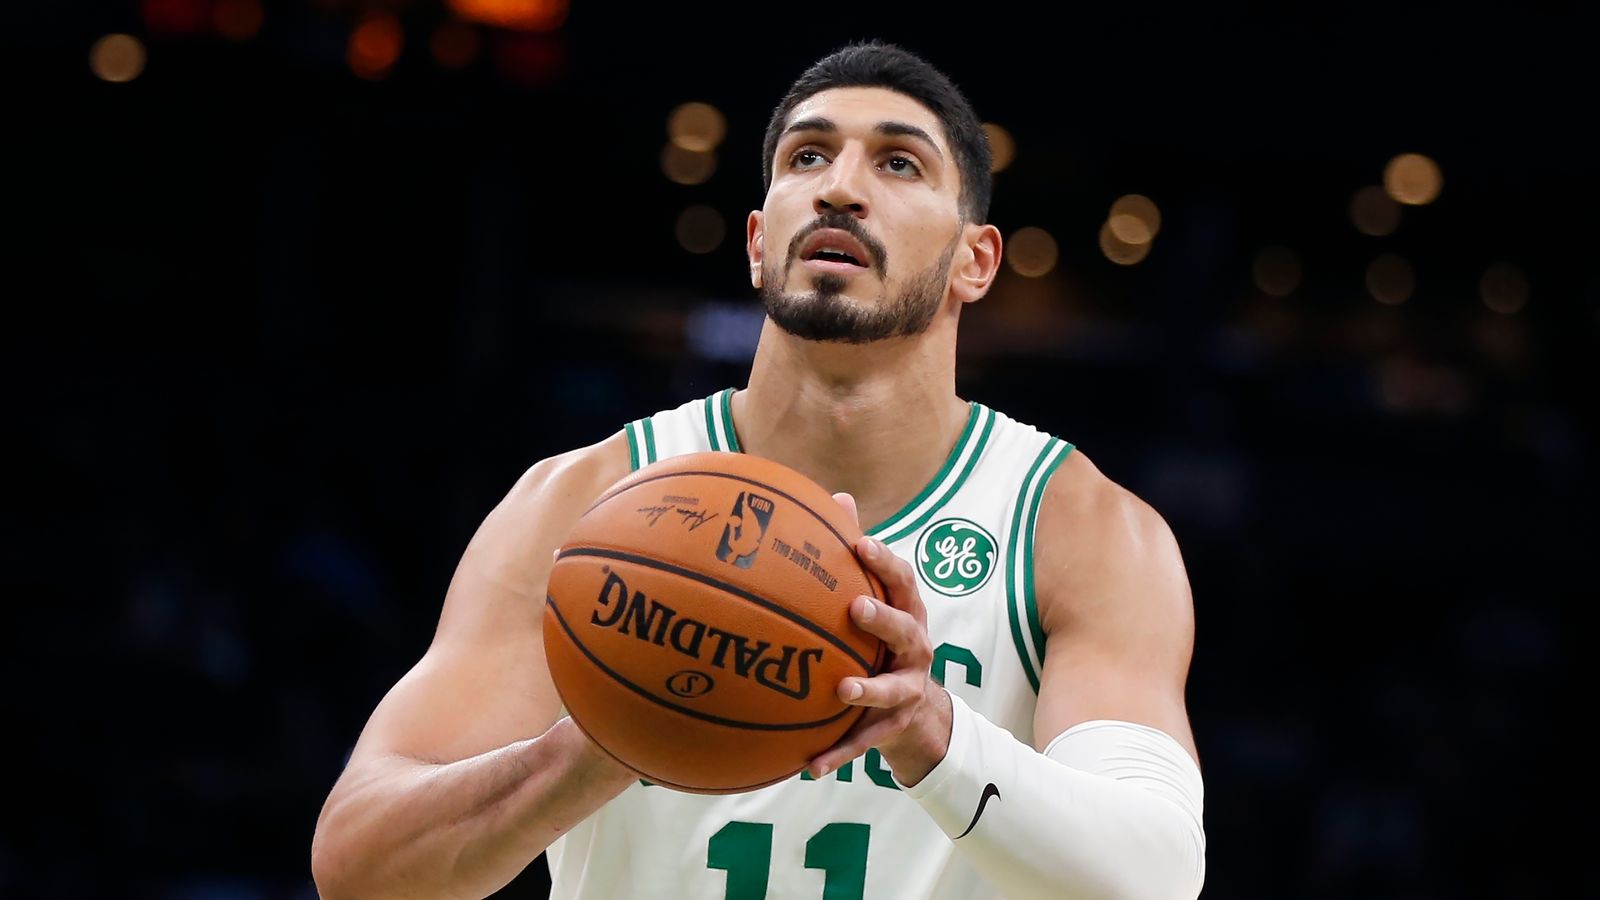 Enes Kanter felt encouraged to speak out against China after NBA supported players fighting other injustices 2